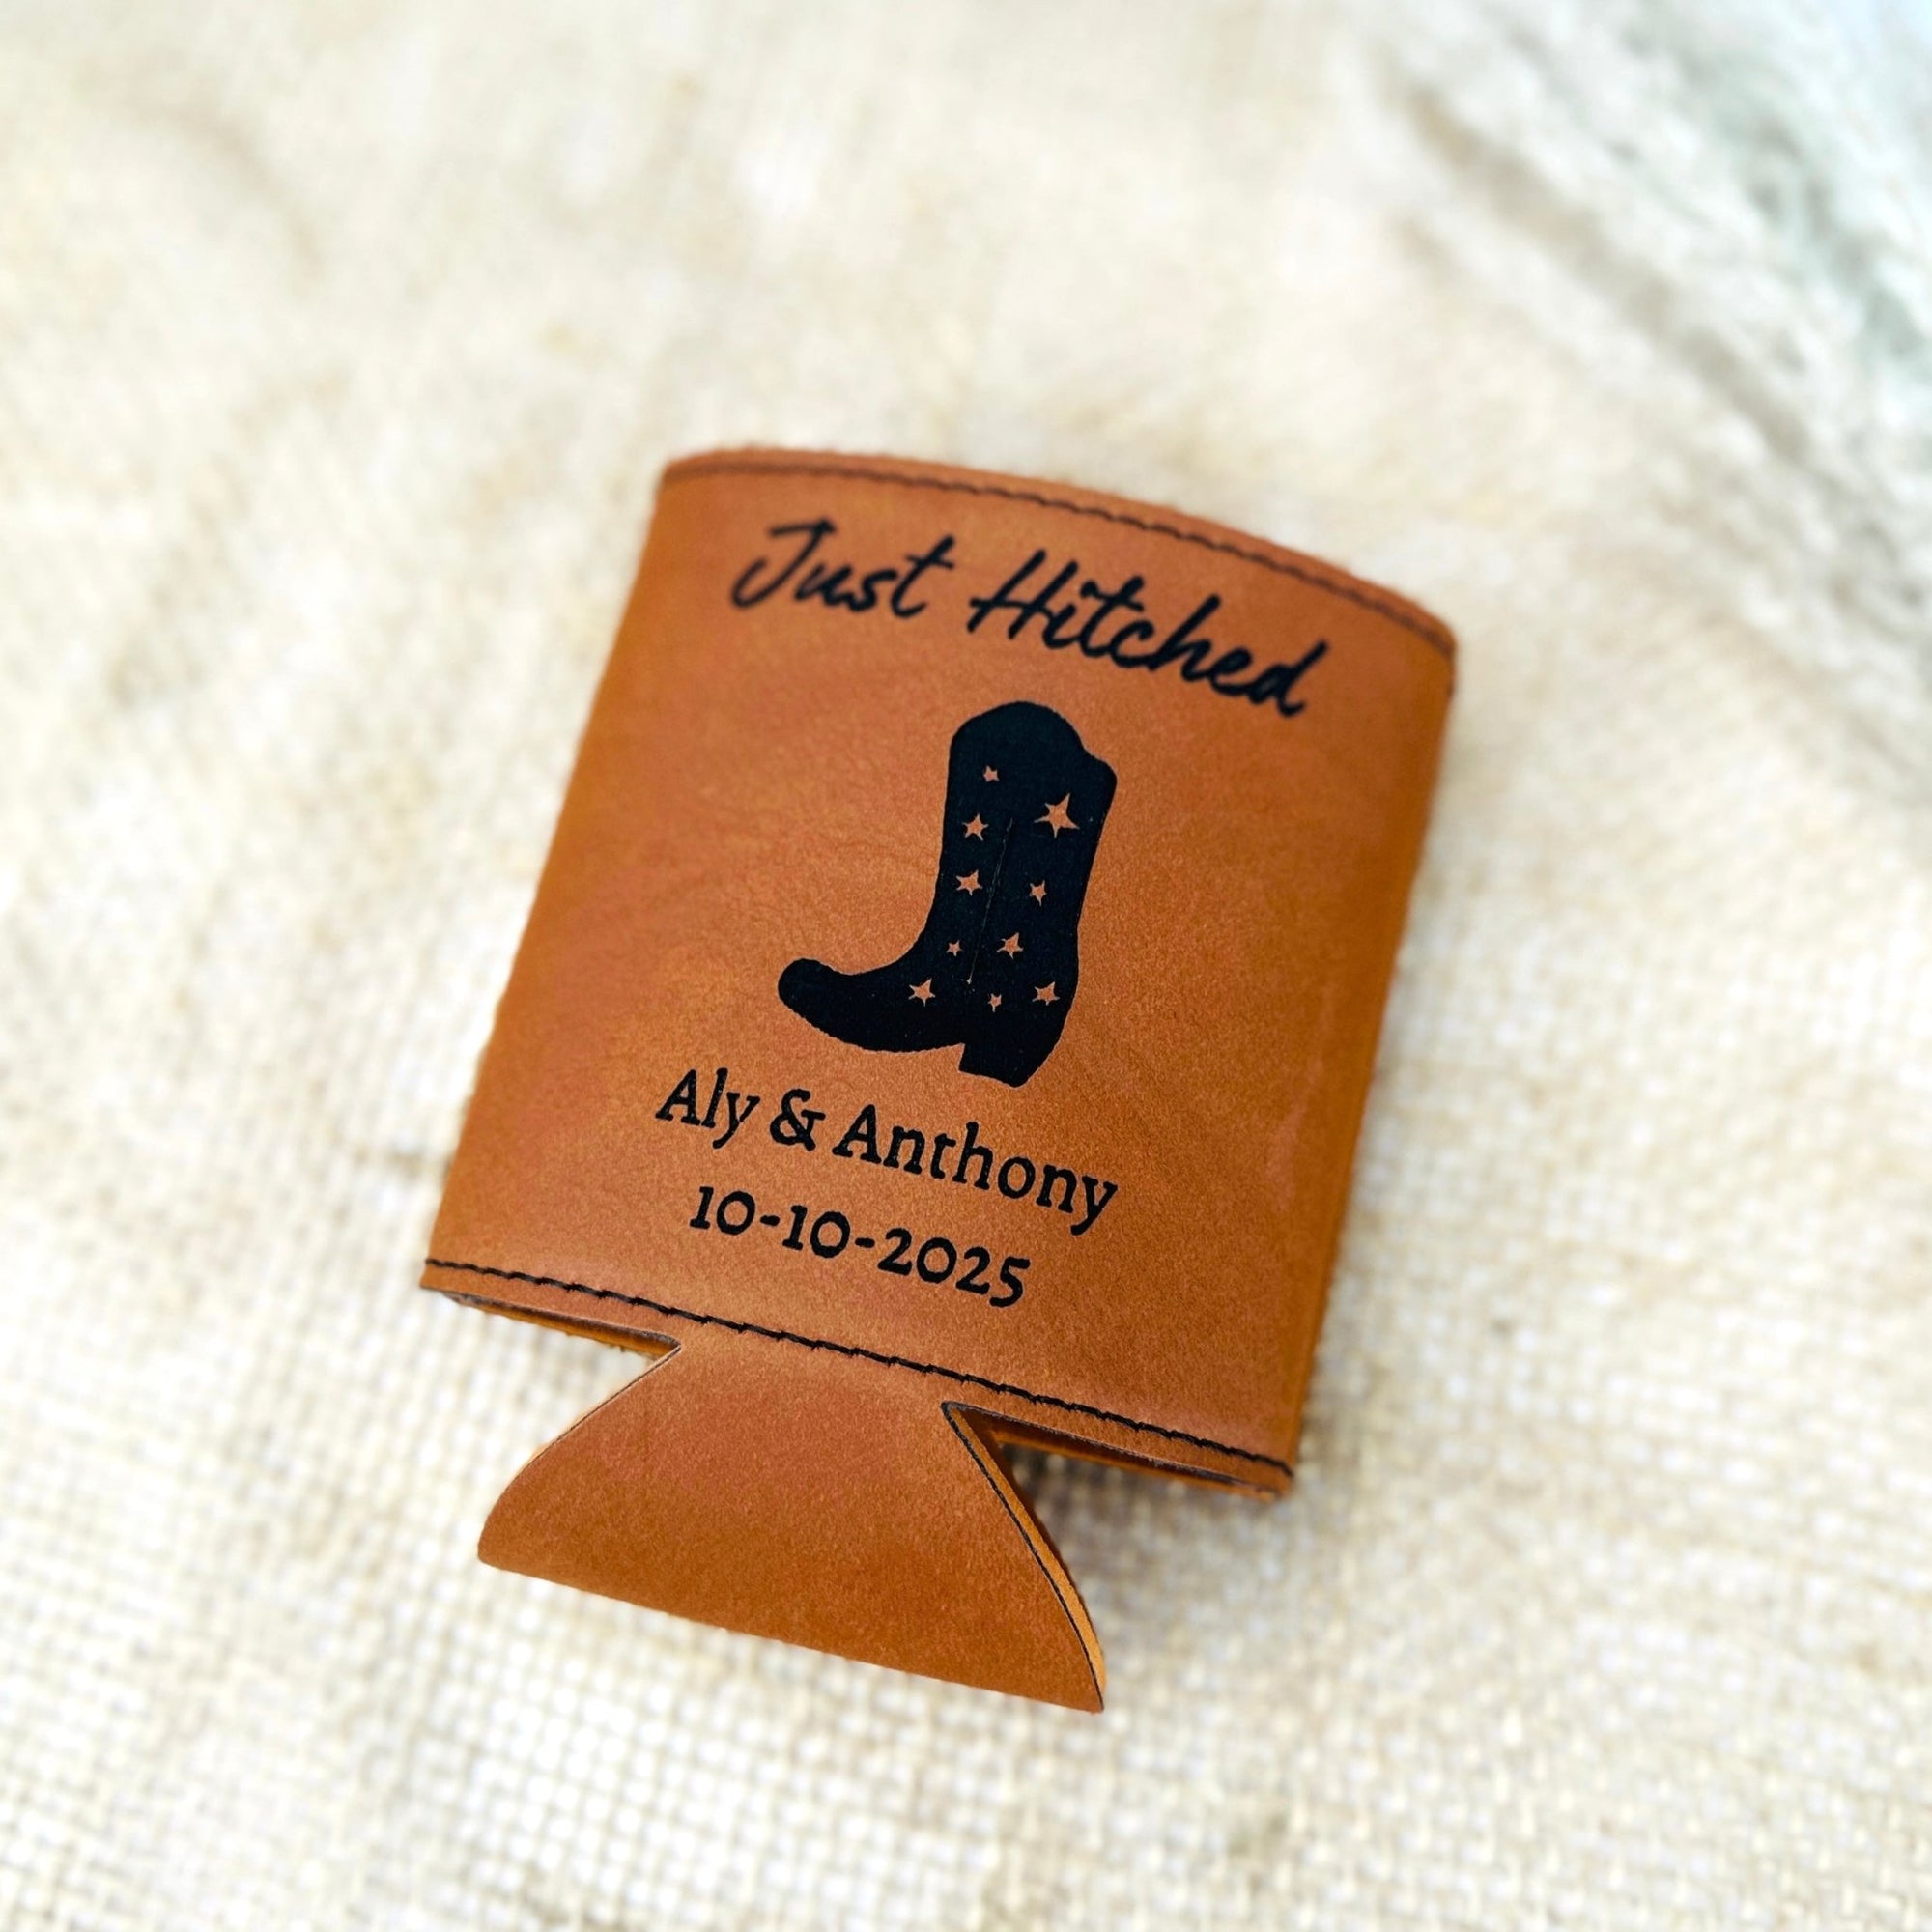 Just Hitched Koozie - Forever Wedding Favors